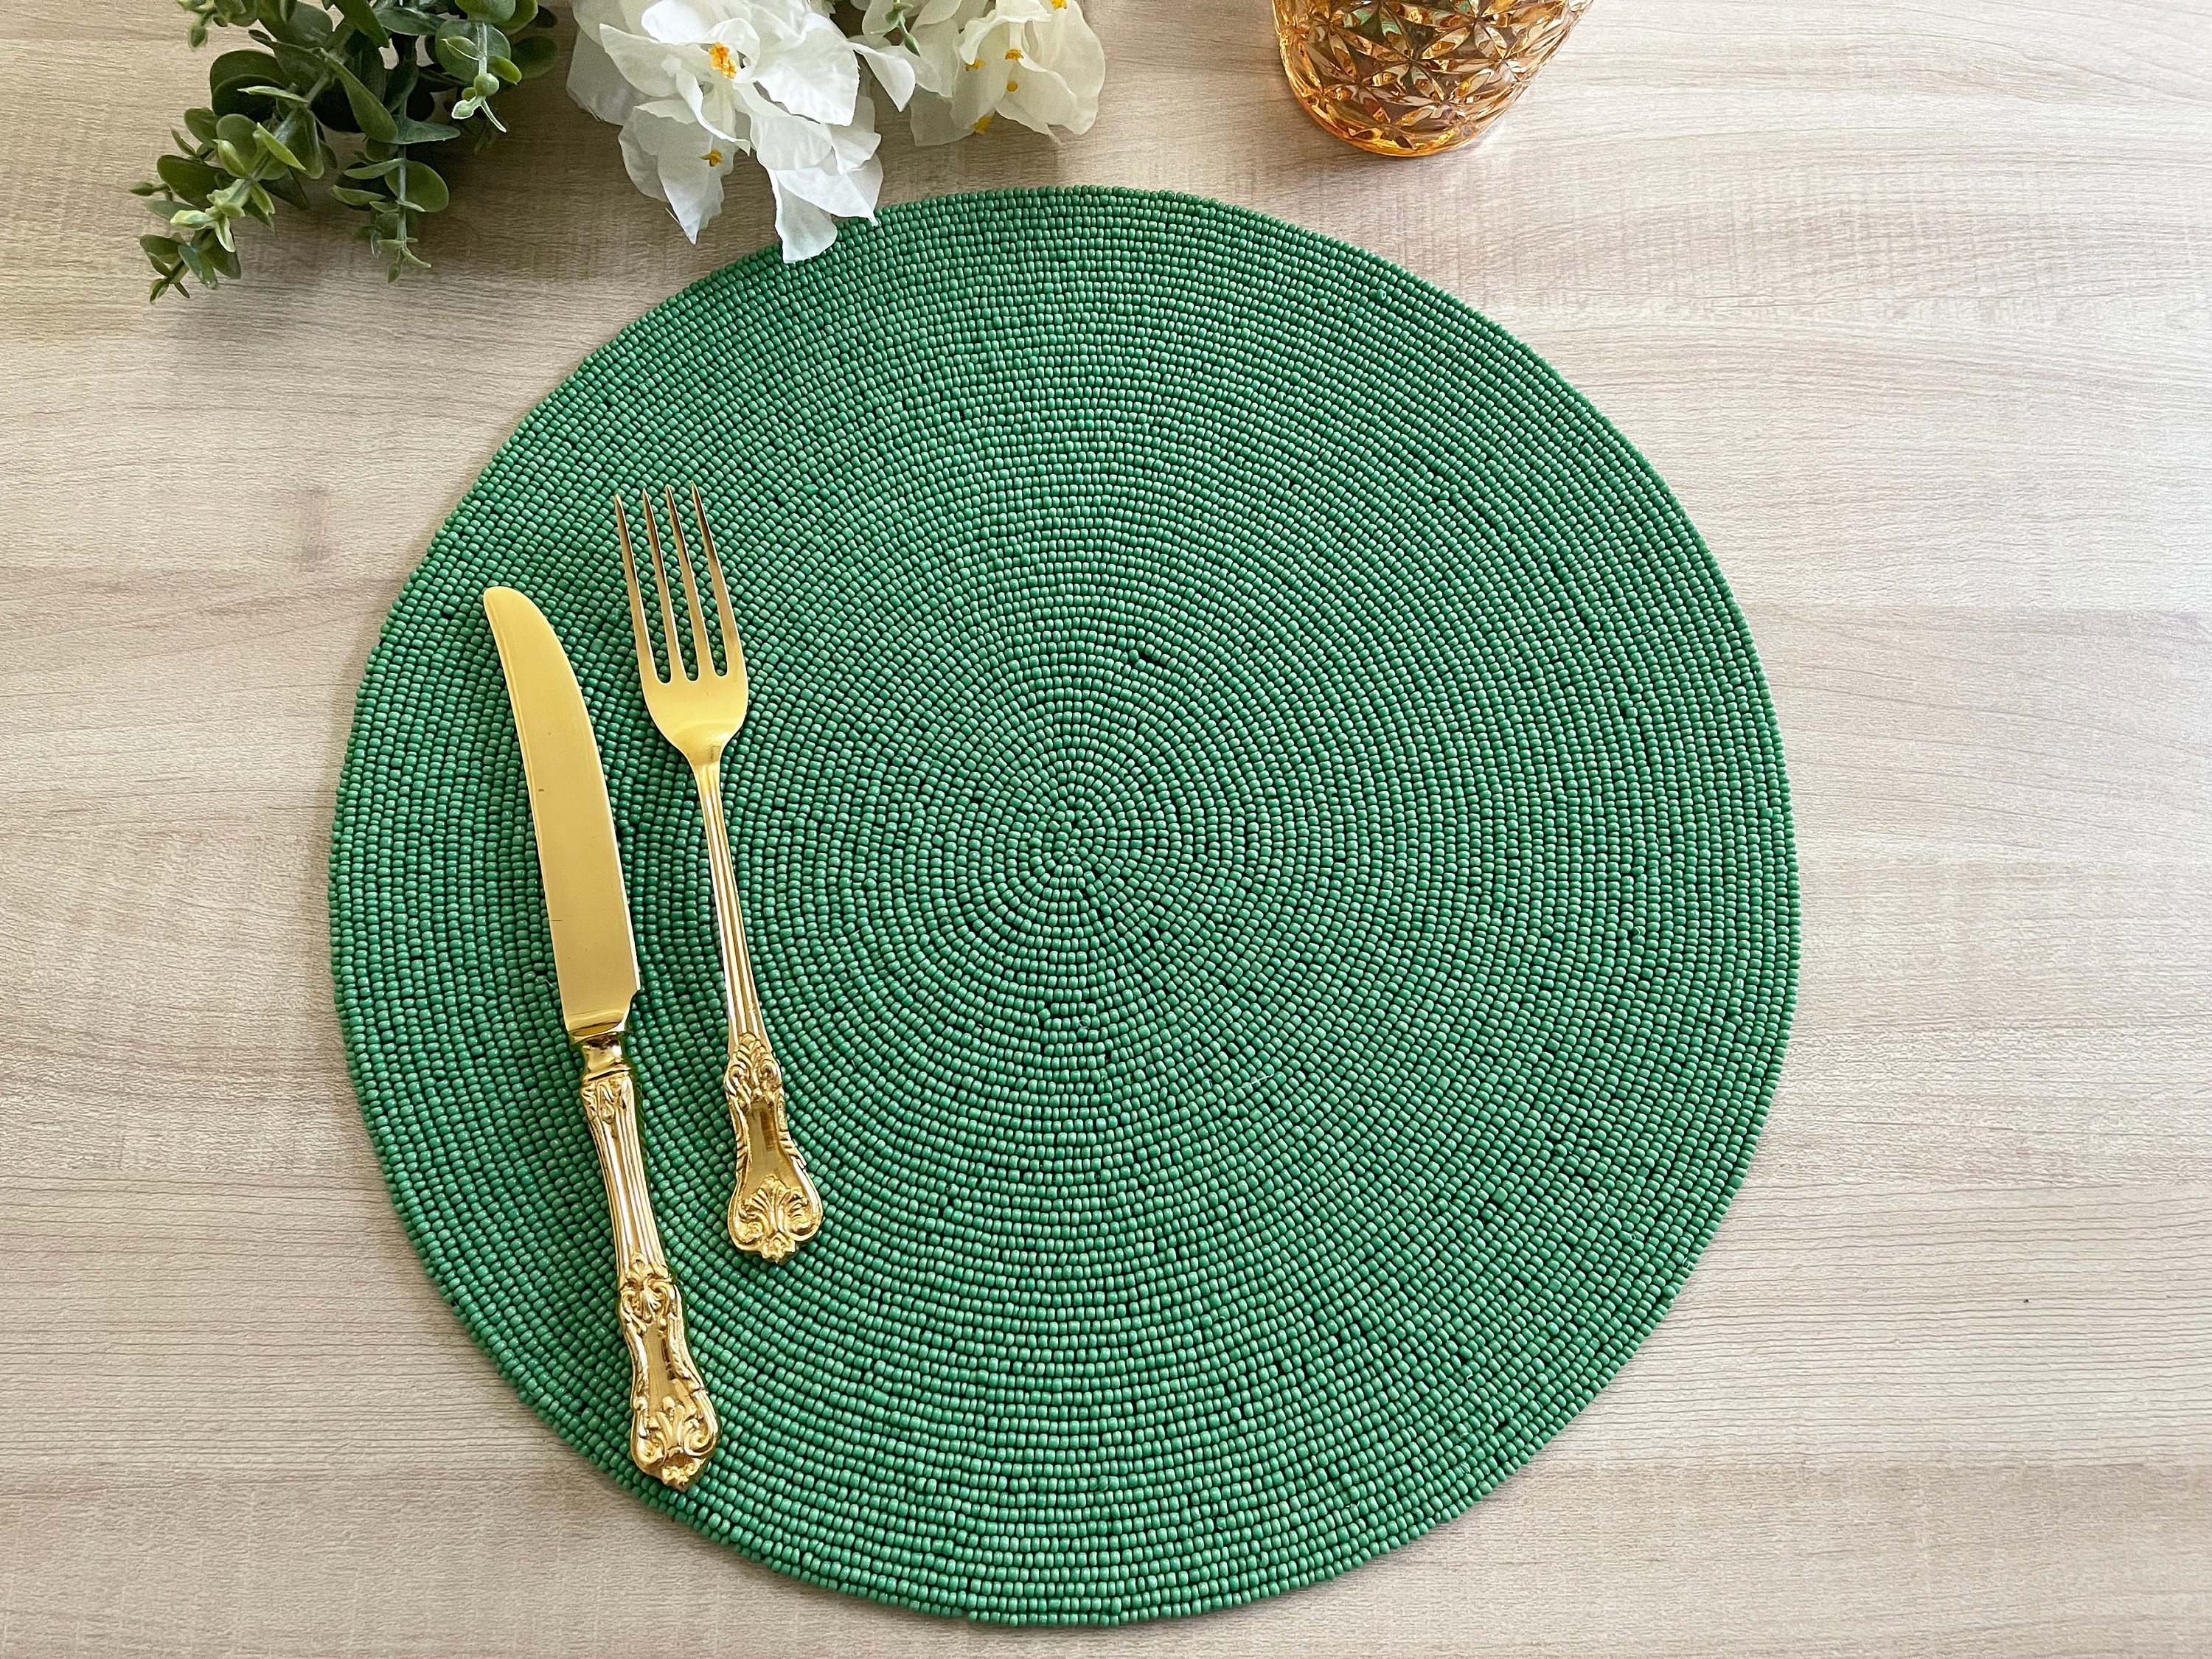 Buy Wholesale China Placemat Round Leaf Place Mats For Dining